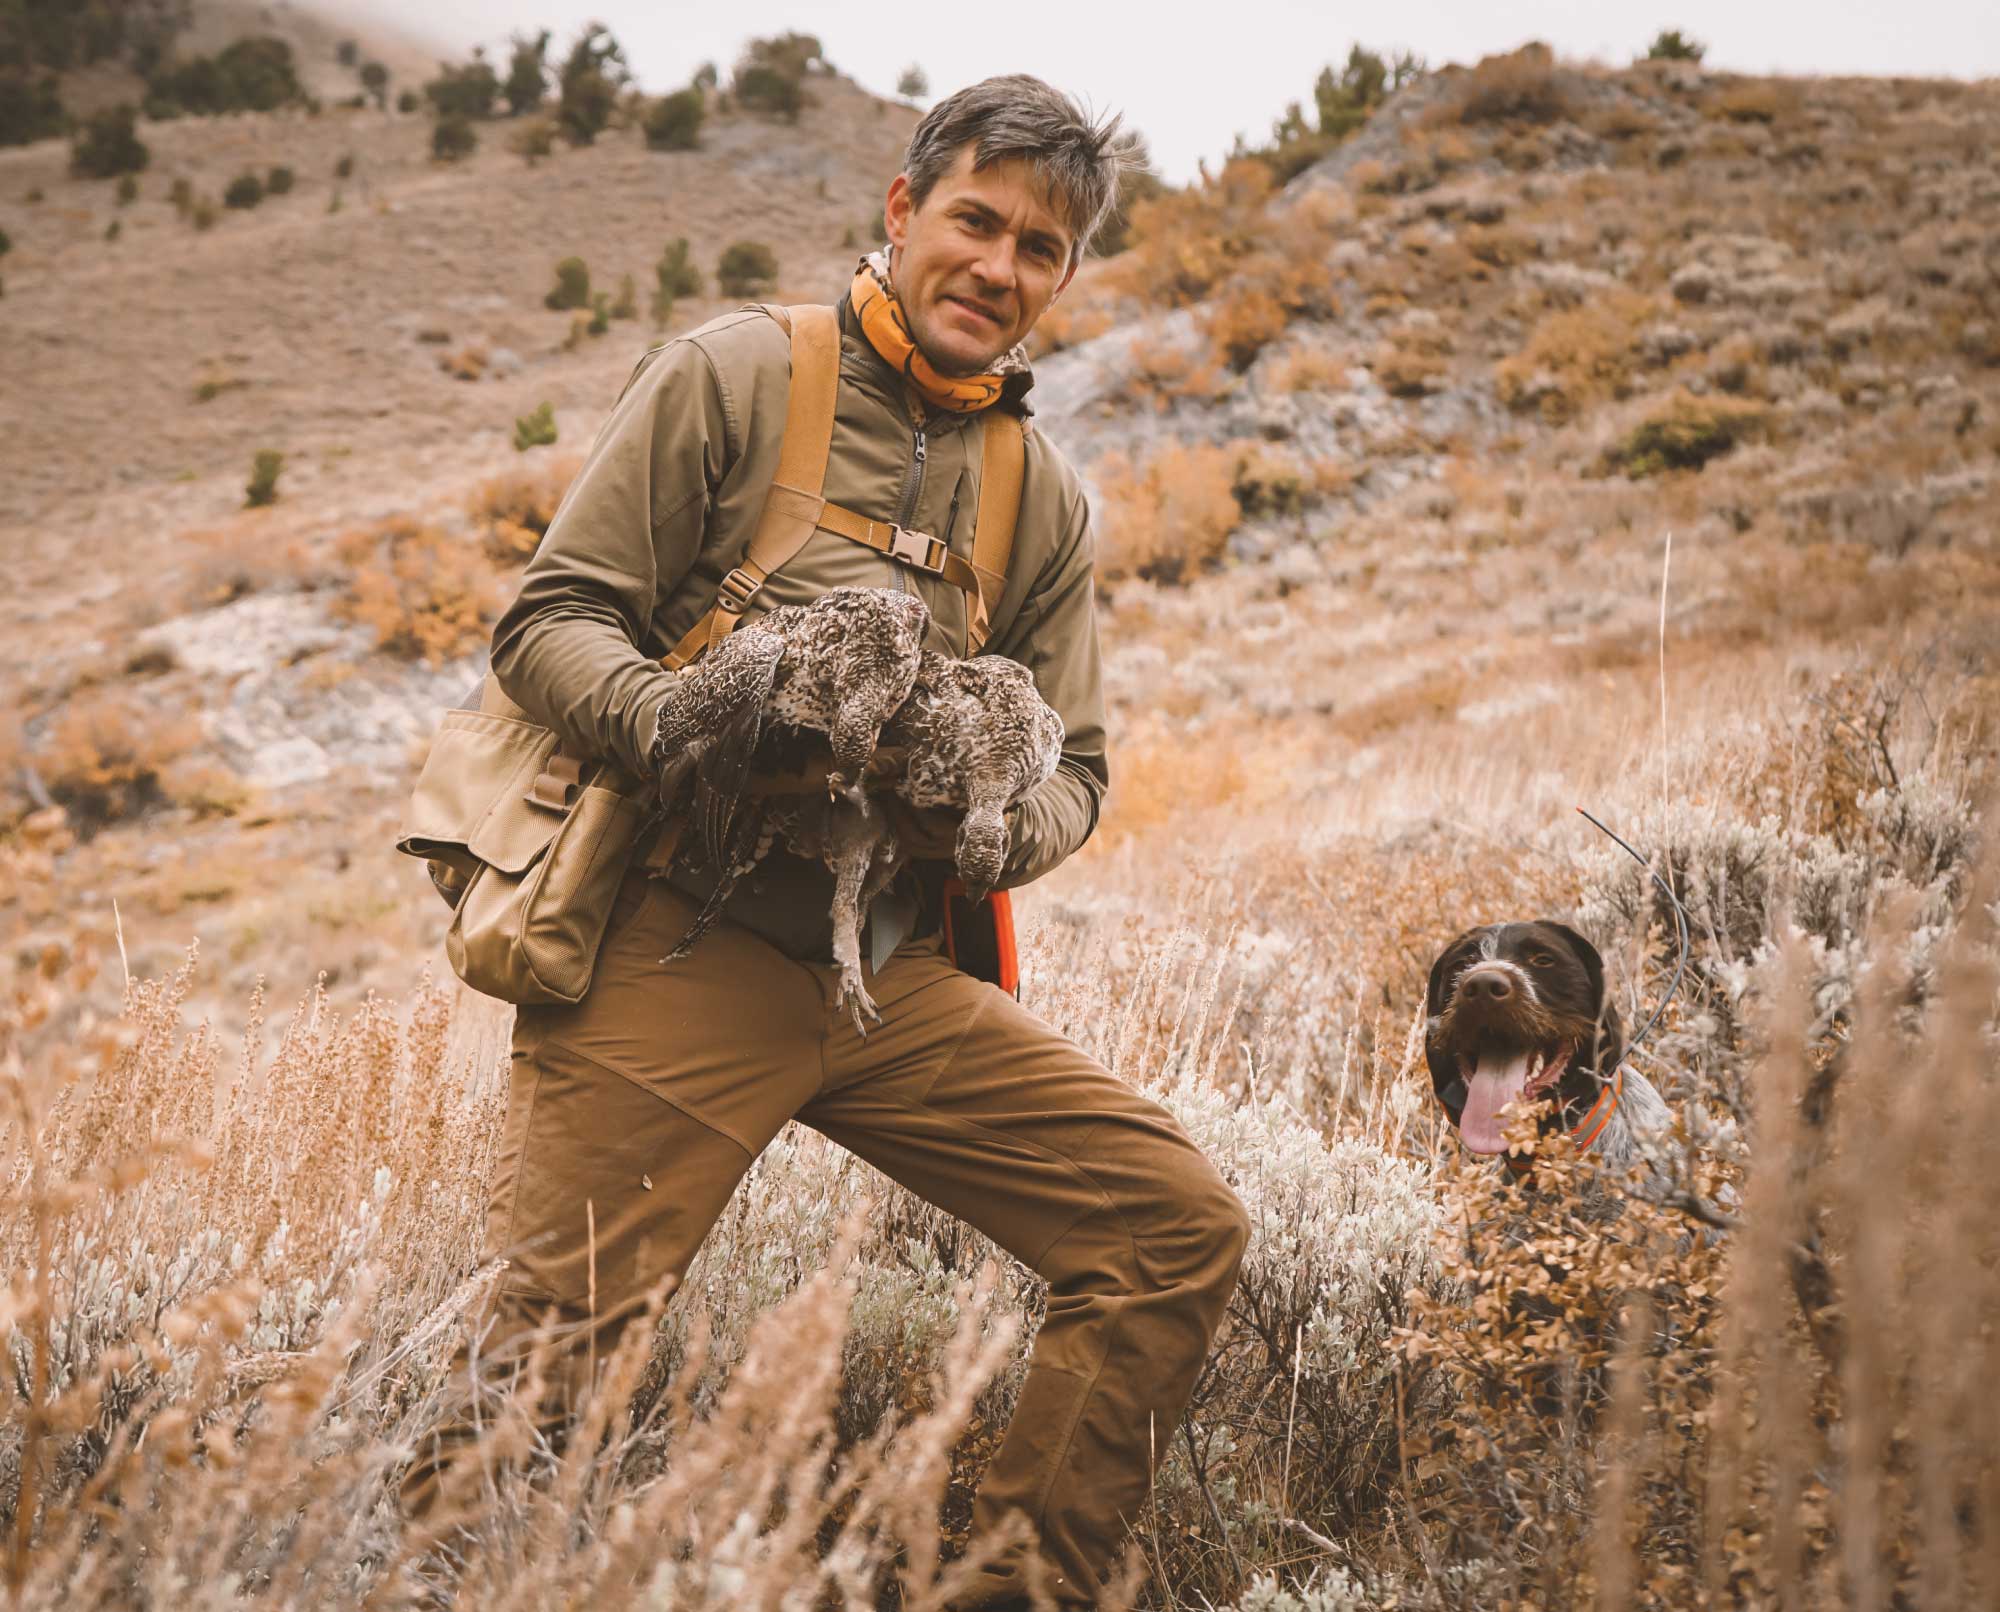 https://projectupland.com/wp-content/uploads/2020/02/First-Lite-Sawbuck-Brush-Pants-Review-for-Upland-Hunting-3.jpg